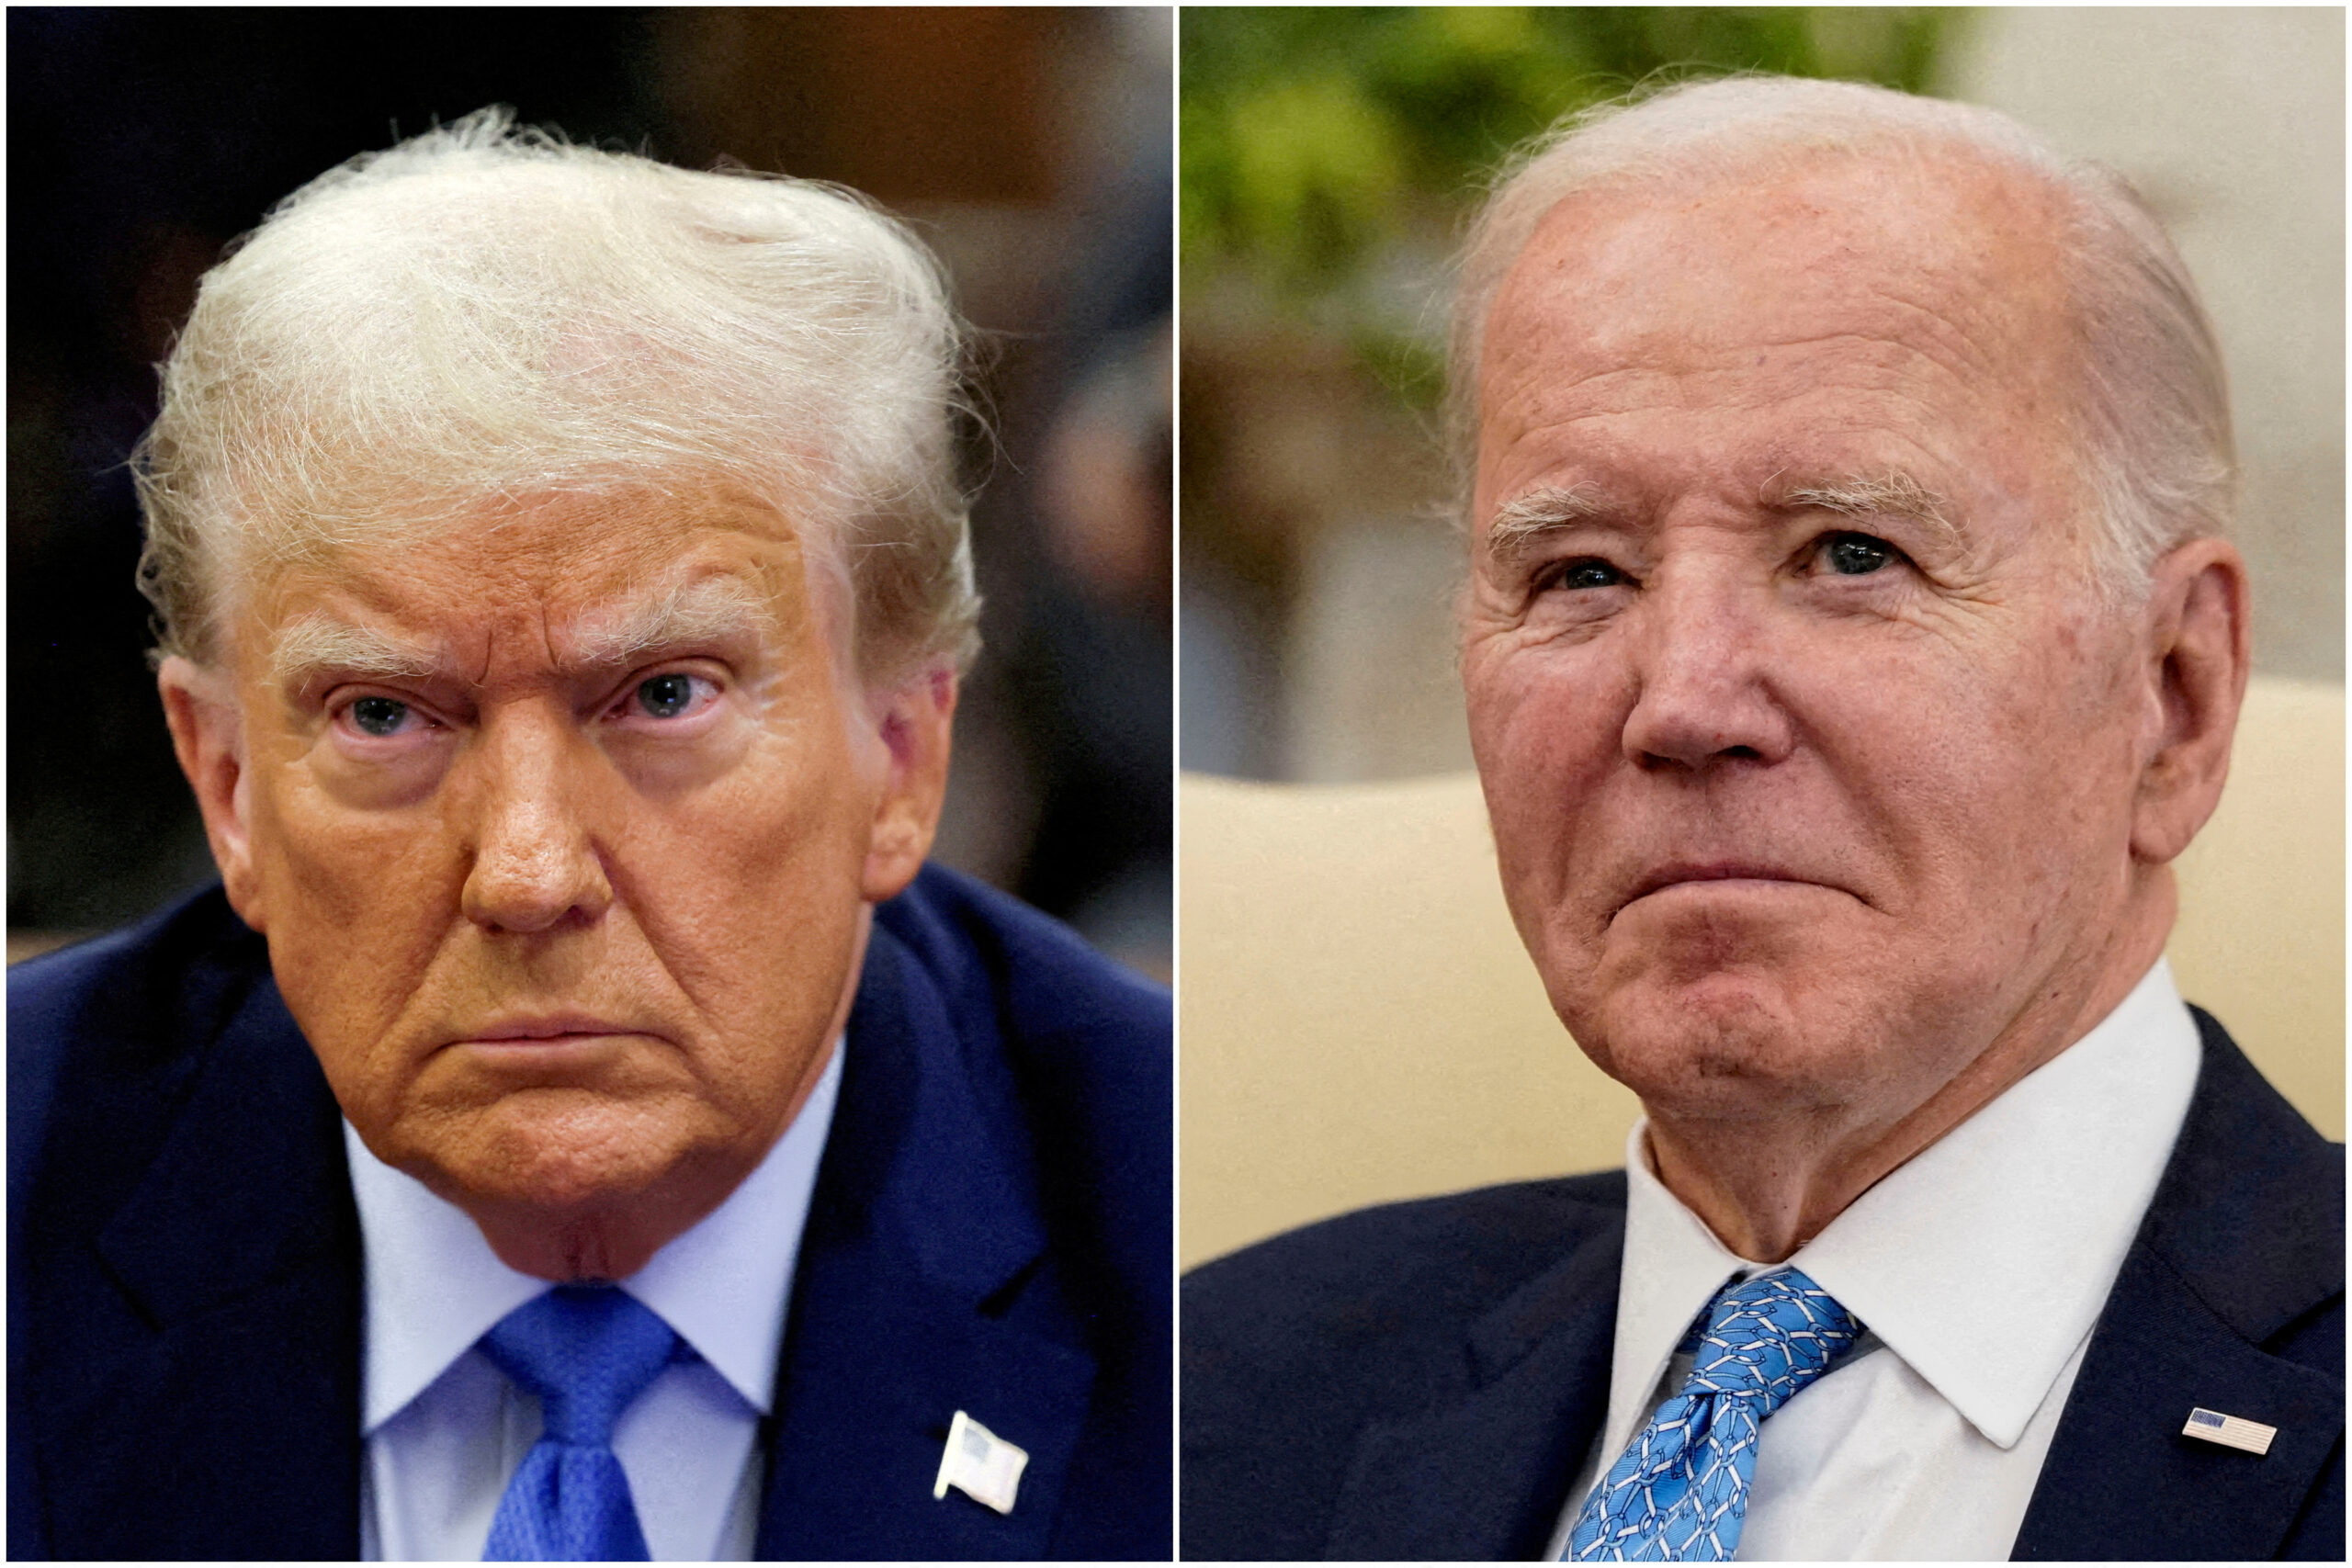 Prominent Republicans Supporting Biden Over Trump Signal Party Divide